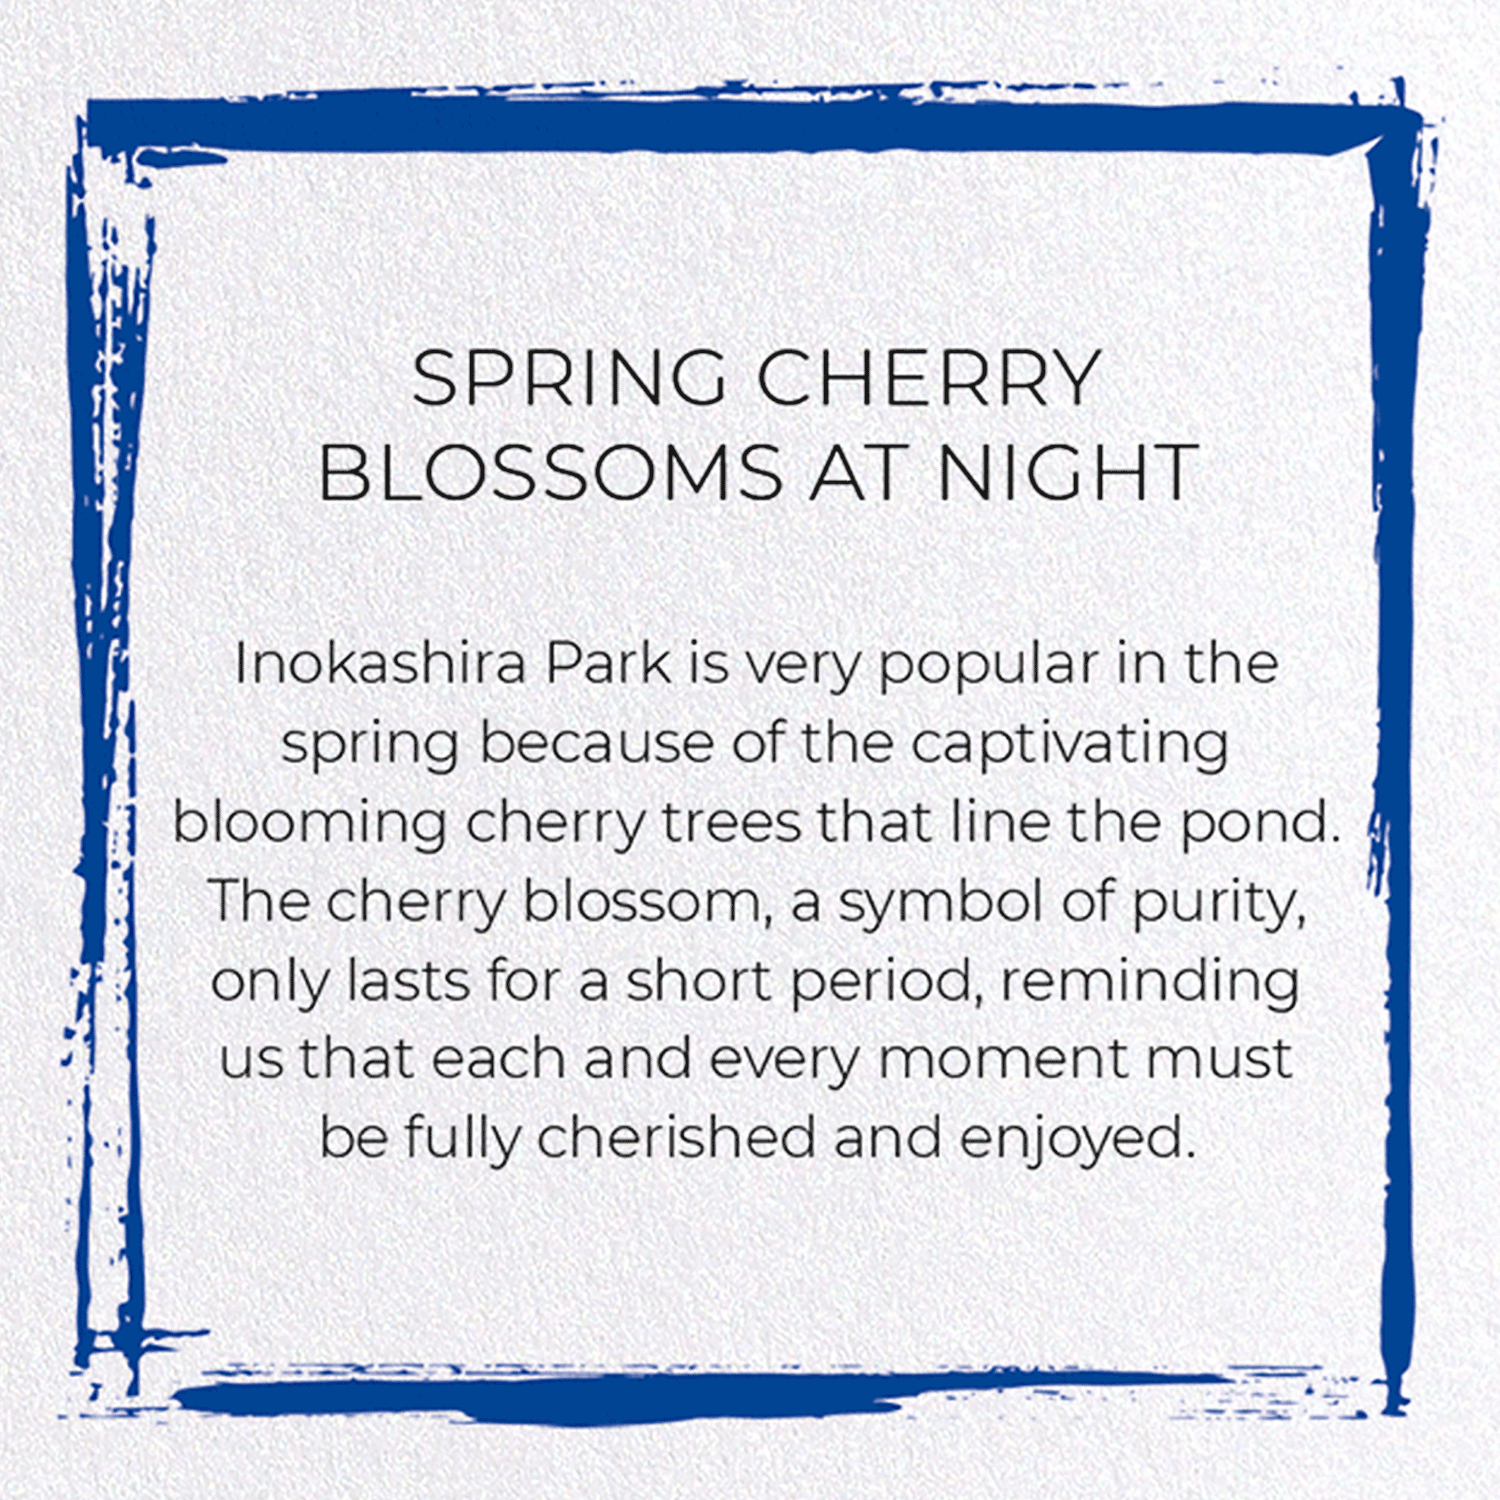 SPRING CHERRY BLOSSOMS AT NIGHT